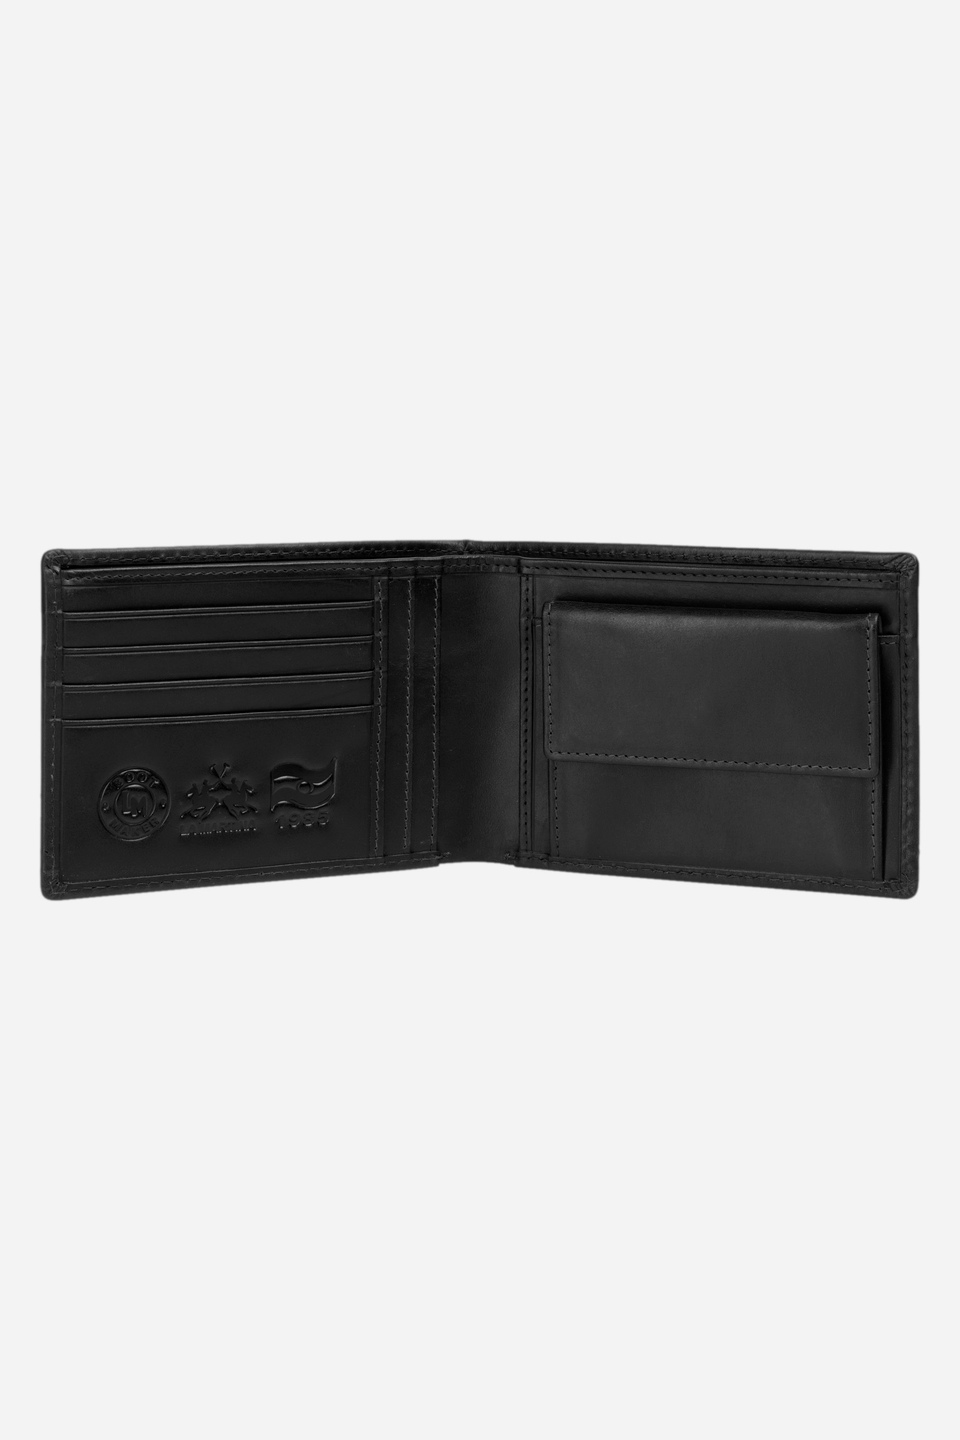 Men's leather wallet with coin purse - Axel | La Martina - Official Online Shop